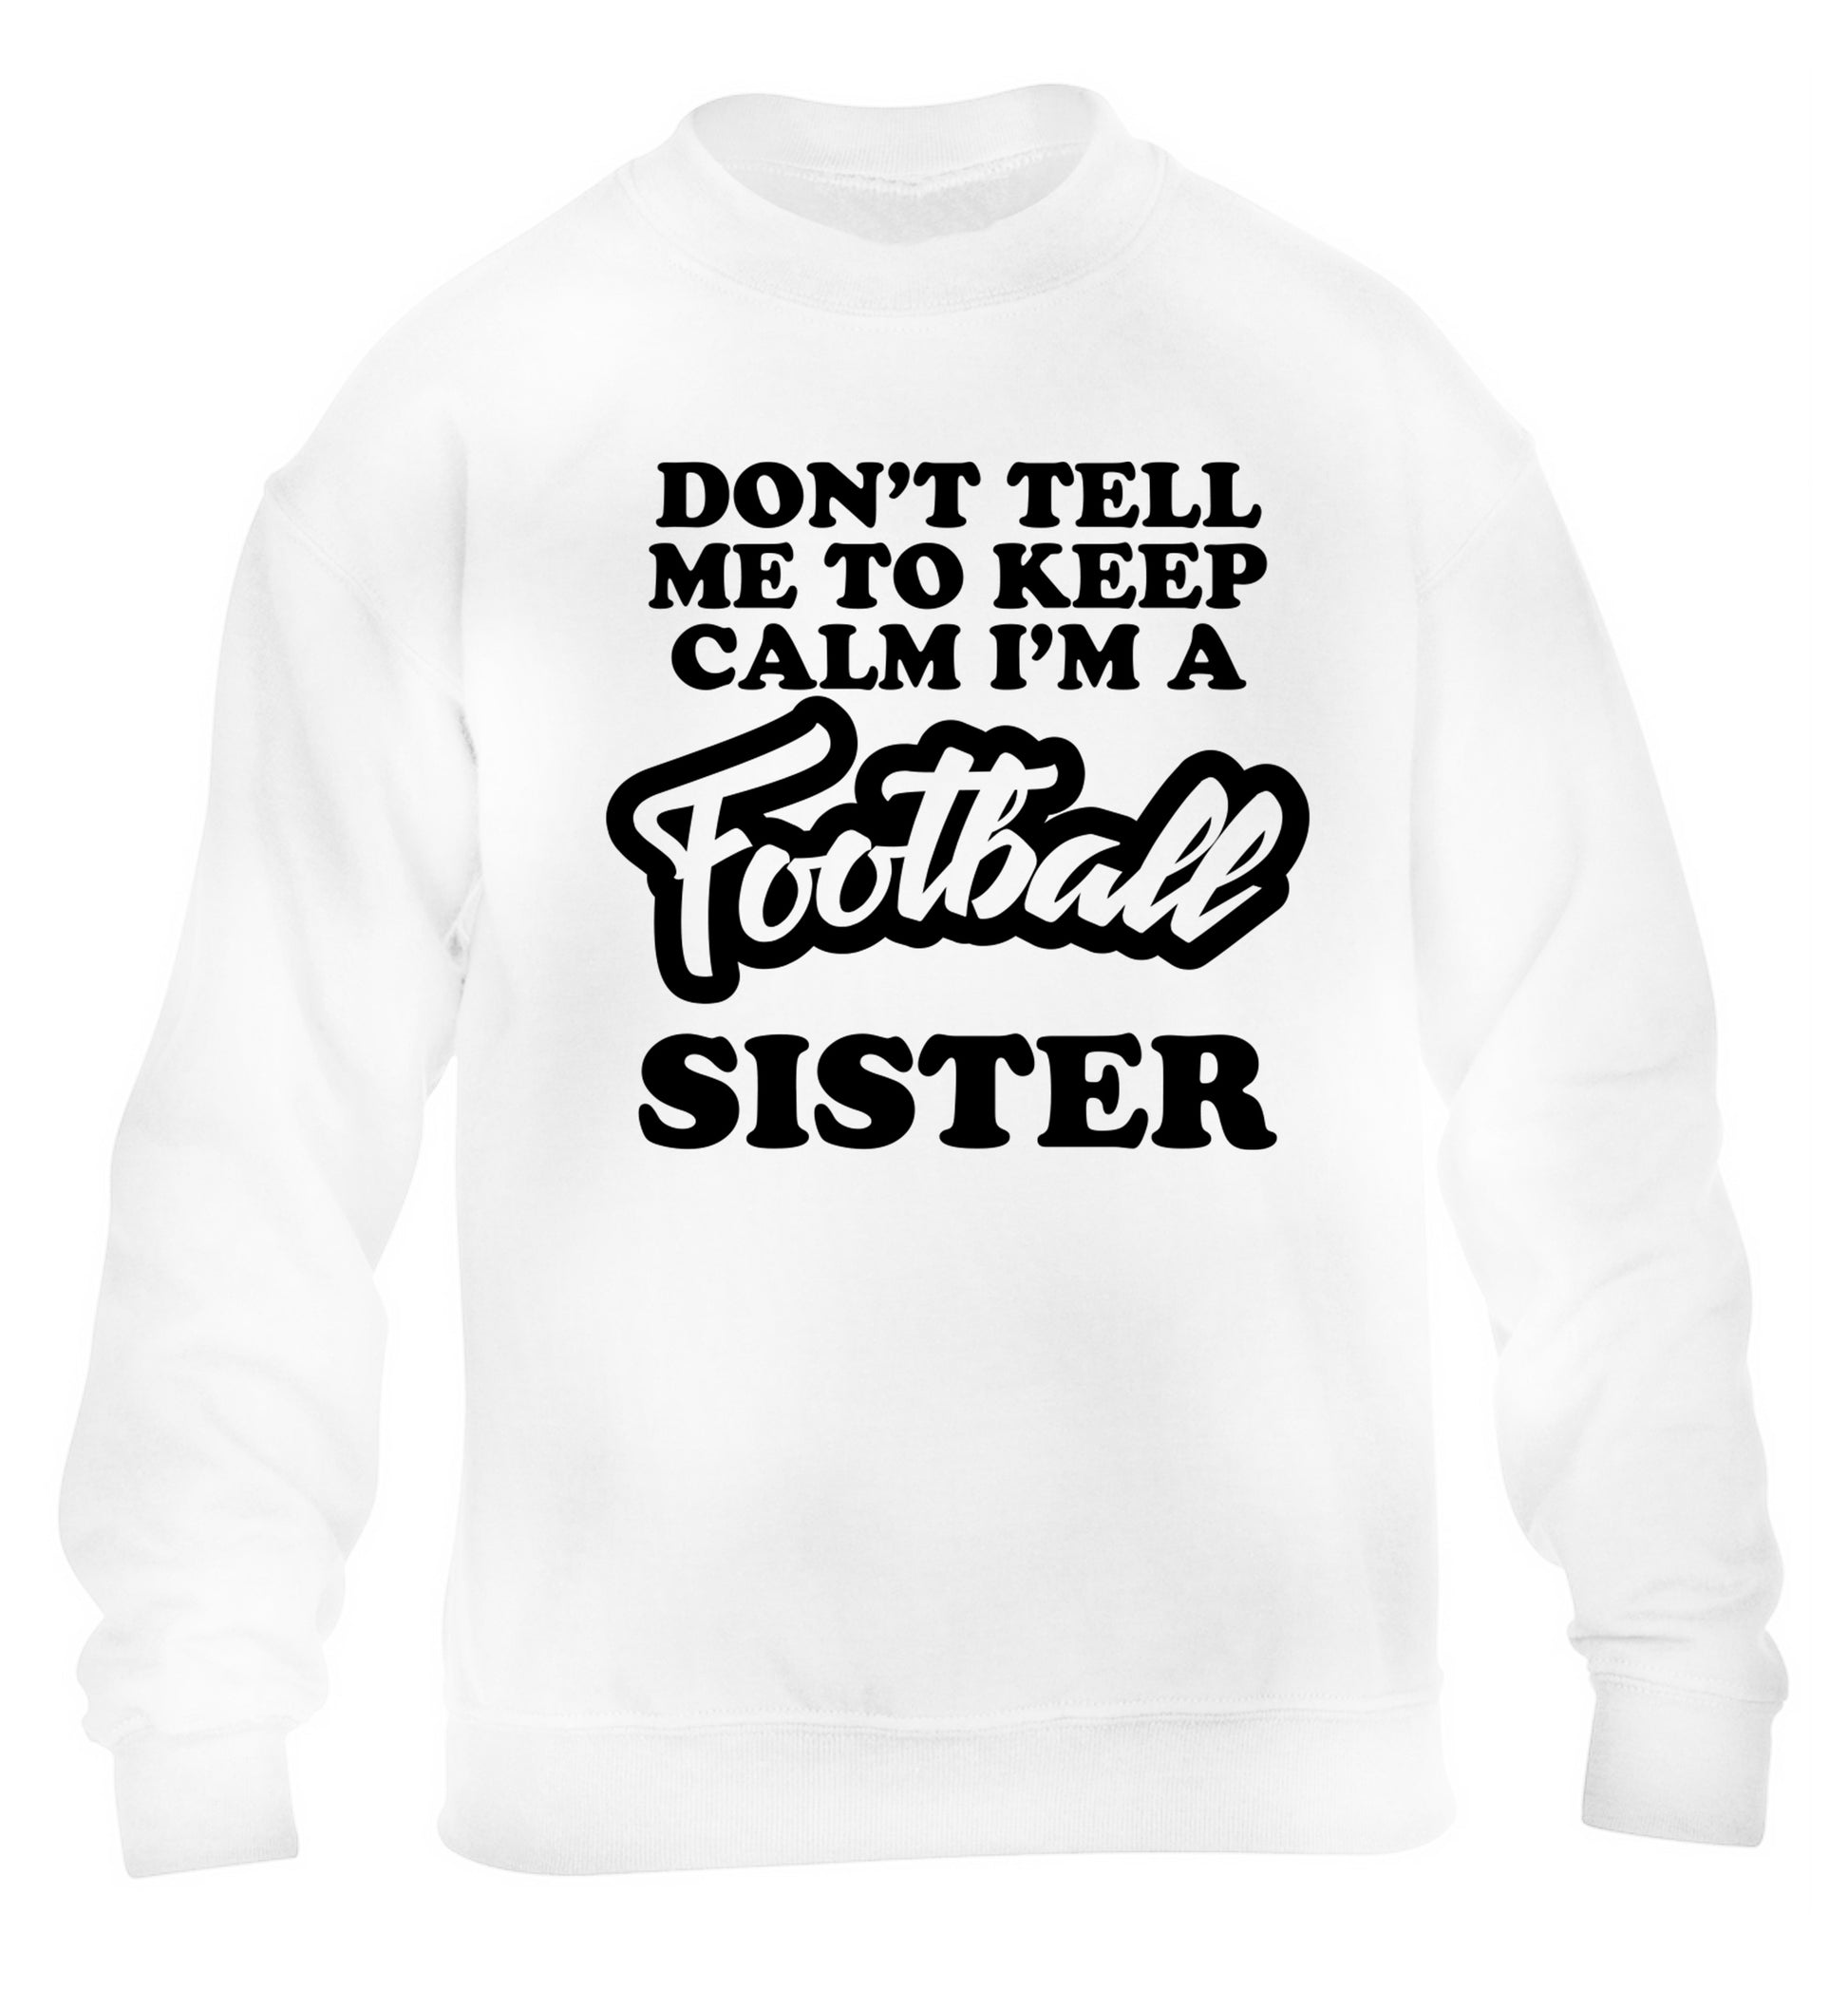 Don't tell me to keep calm I'm a football sister children's white sweater 12-14 Years